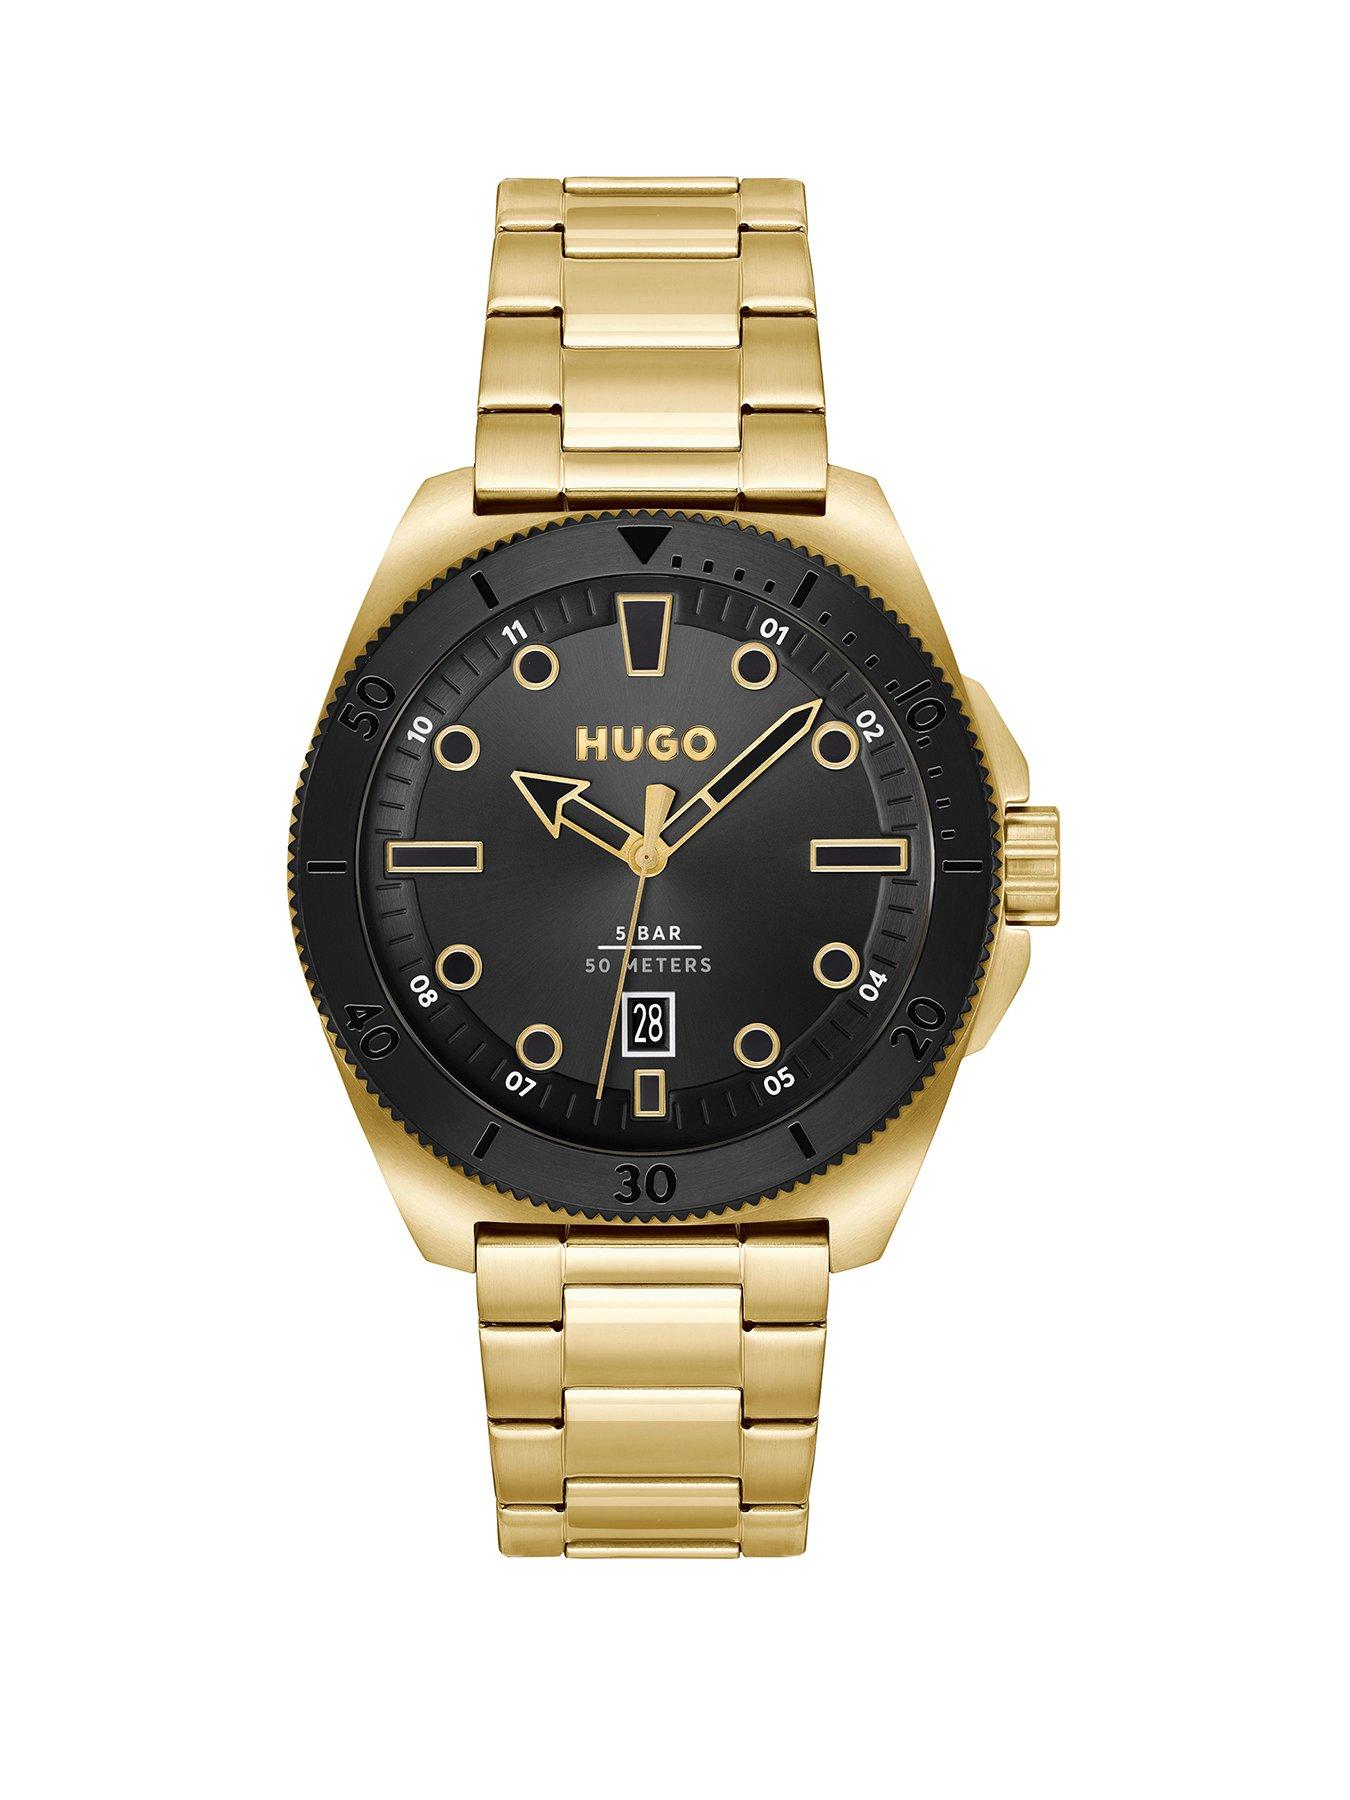 Men's Luxury Business Watch with Stainless Steel Strap Black & Gold Quartz  UK